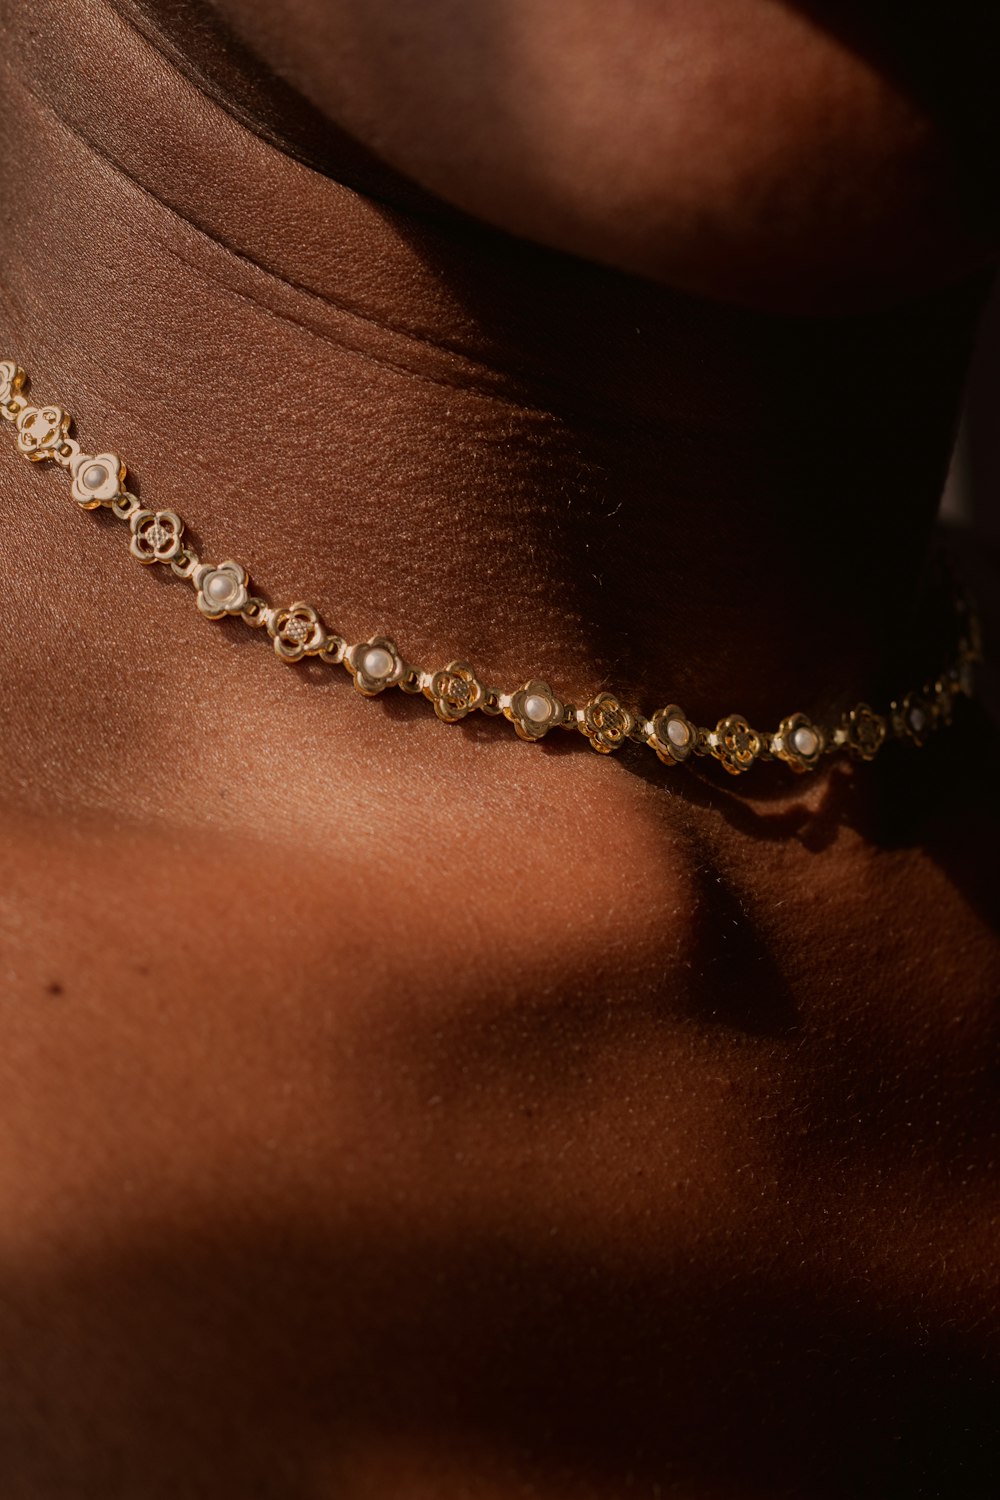 person wearing silver beaded necklace